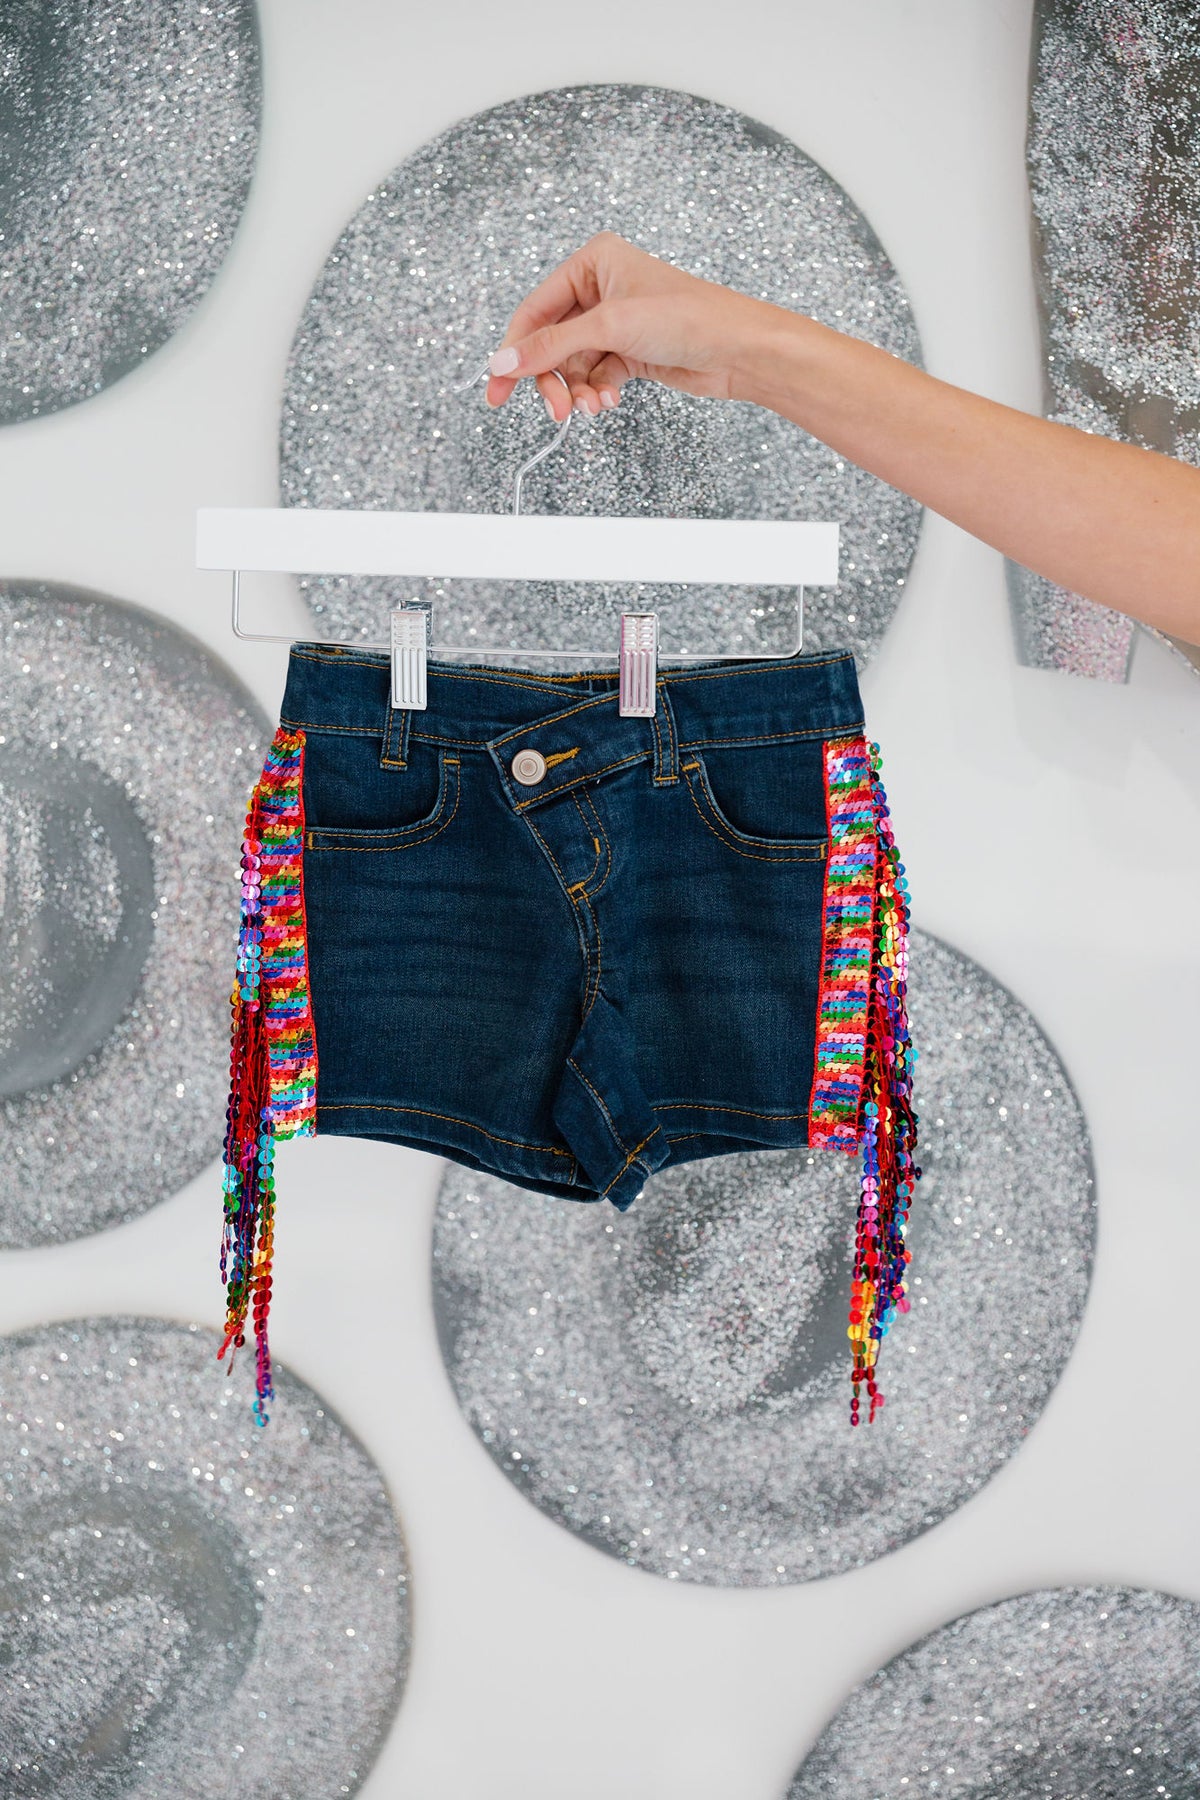 Customizing With Oliver + S: Beach Bum Sunny Day Shorts